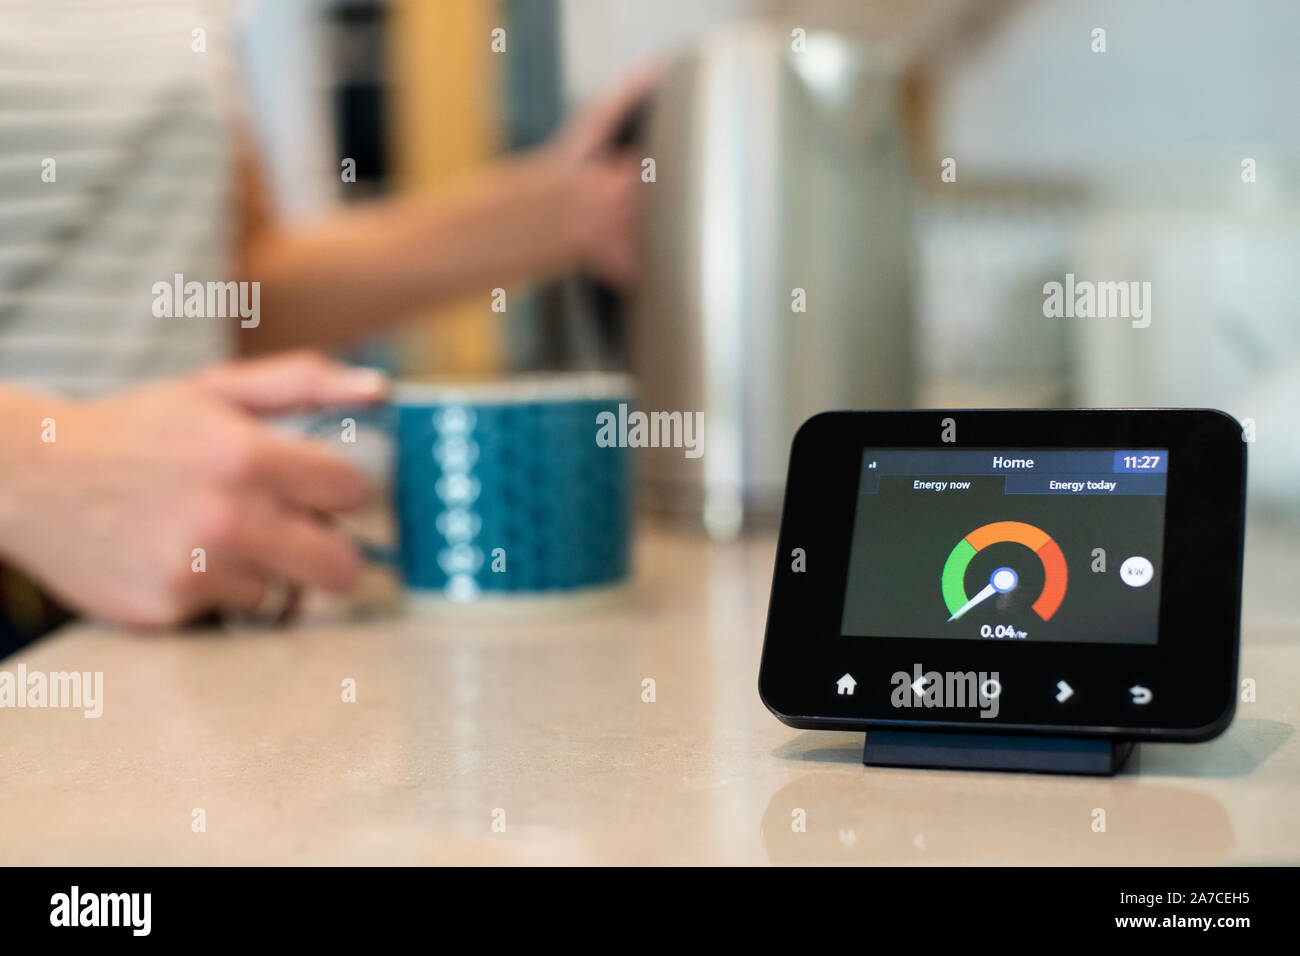 Woman At Home Boiling Kettle For Hot Drink With Smart Energy Meter In Foreground Stock Photo